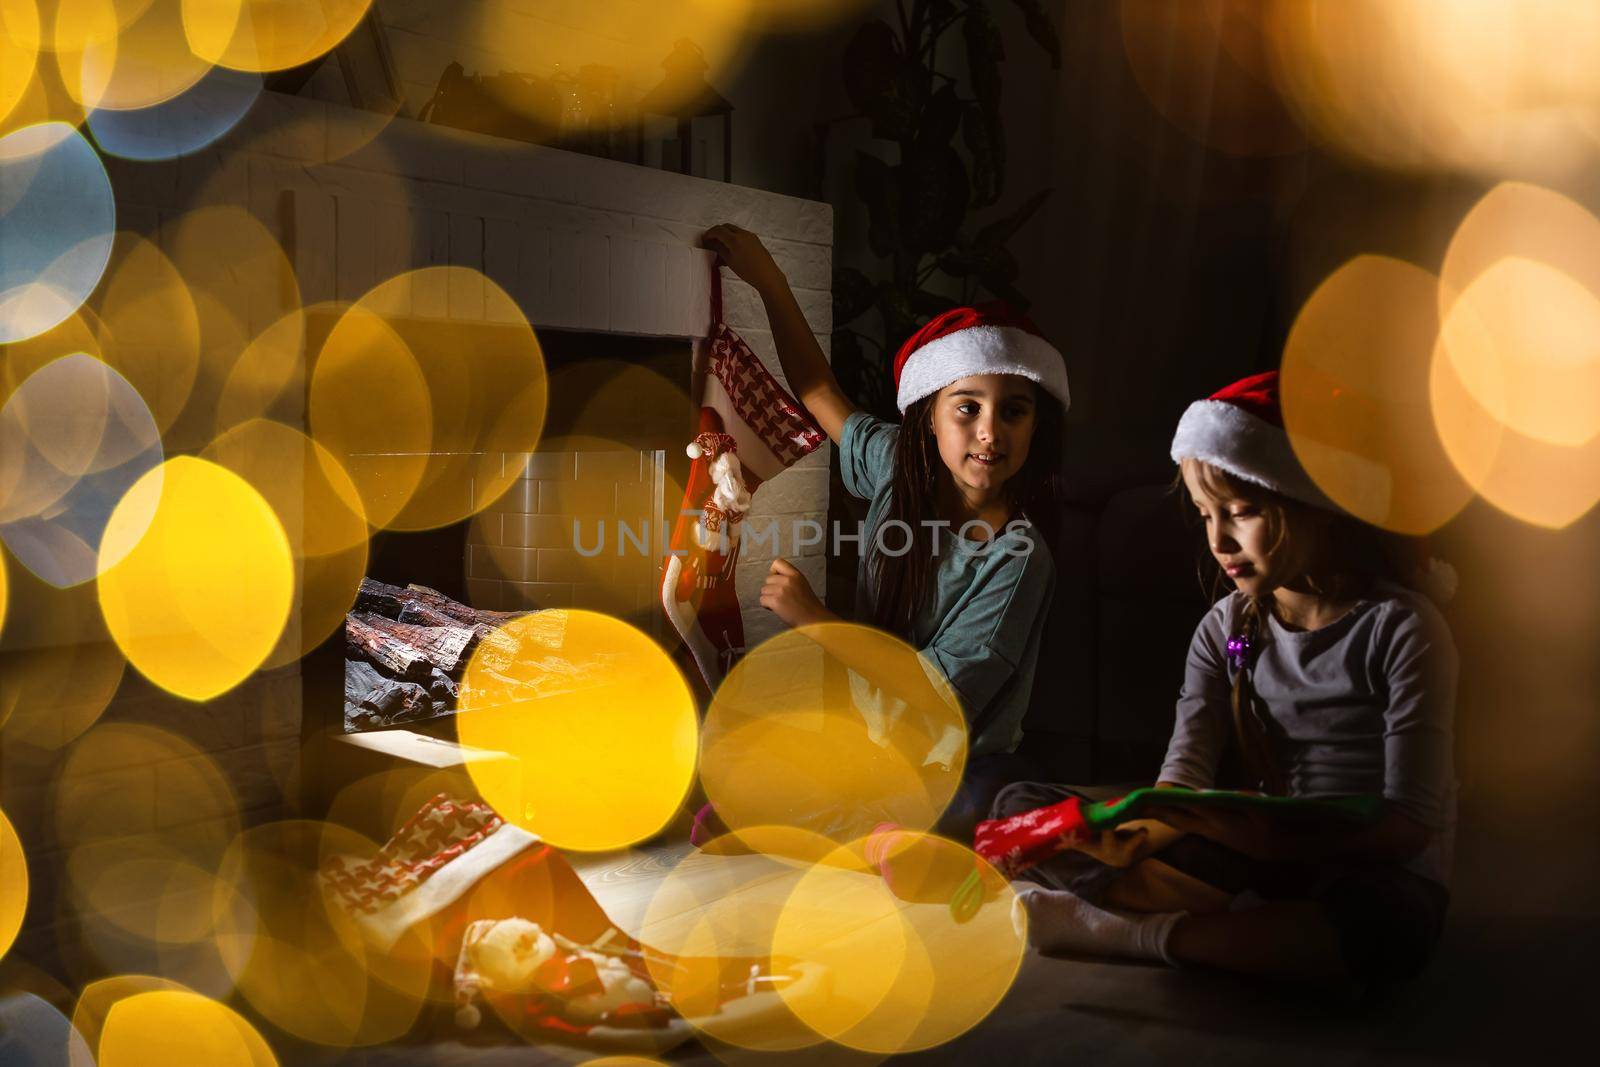 Little kids opening presents next to the fireplace in a cozy home celebrating Christmas by Andelov13